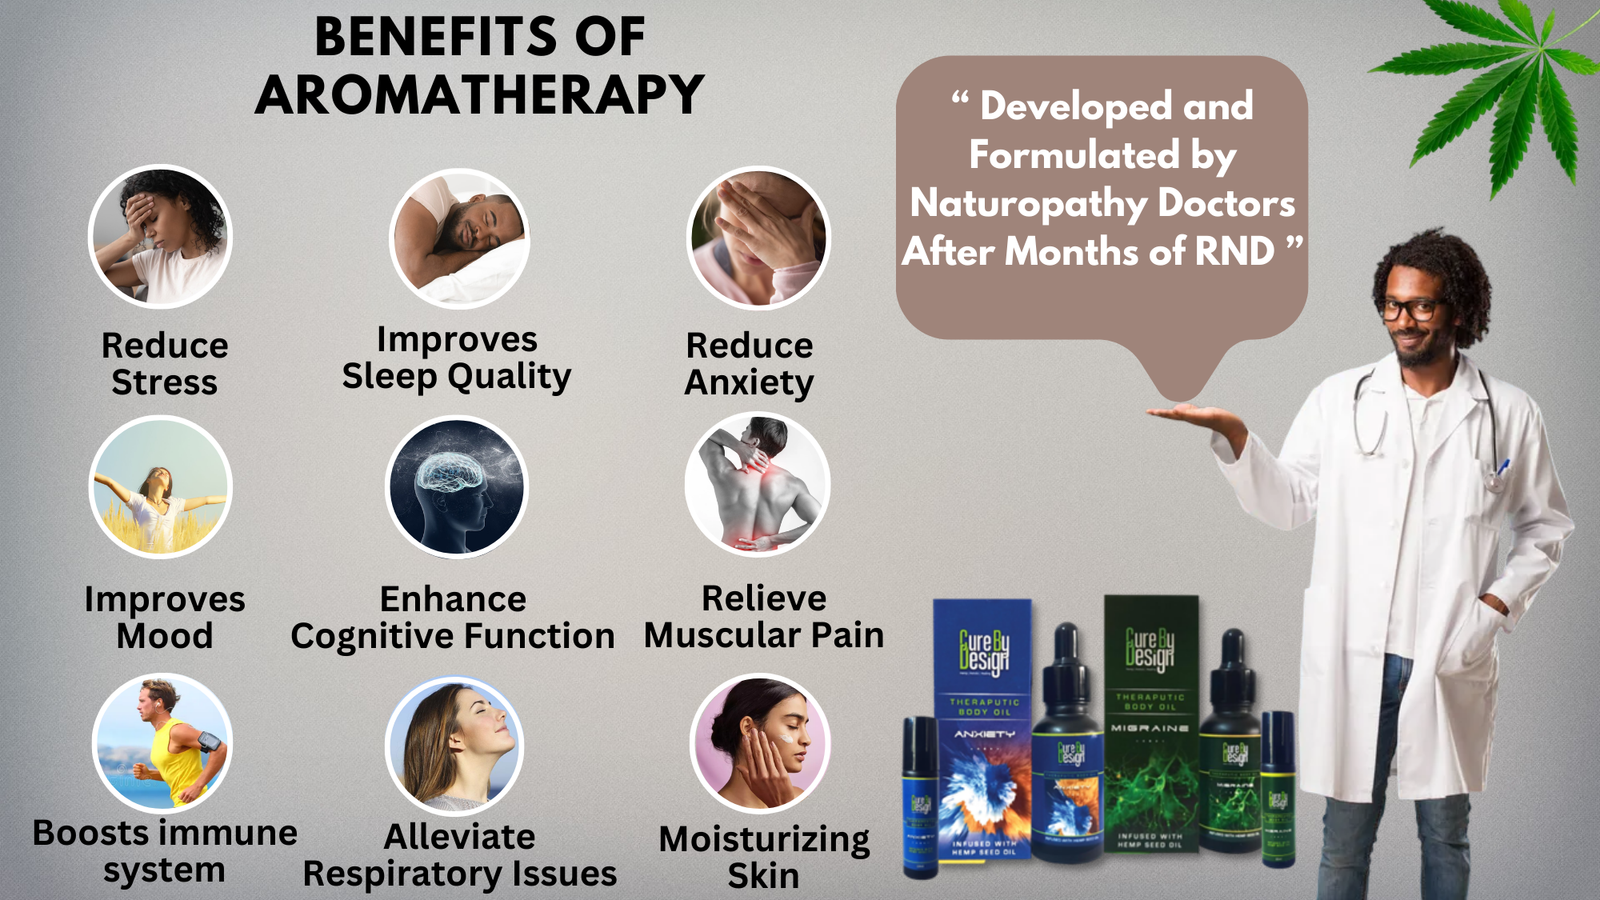 Cure By Design Benefits Of Hemp Infused Aromatherapy Blends